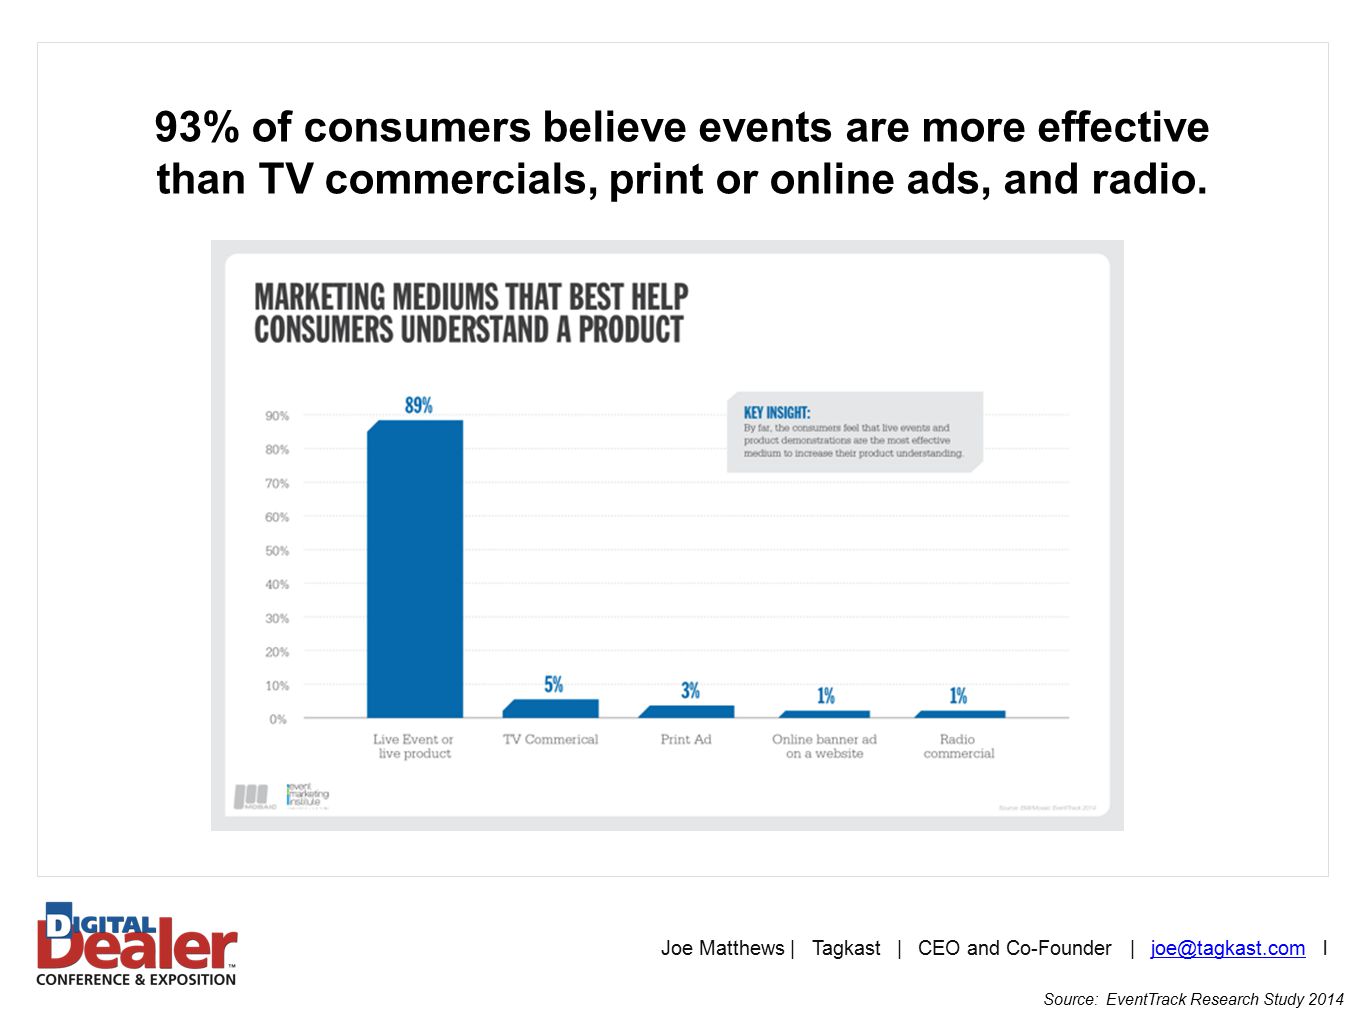 93% of consumers believe events are more effective than TV commercials, print or online ads, and radio.